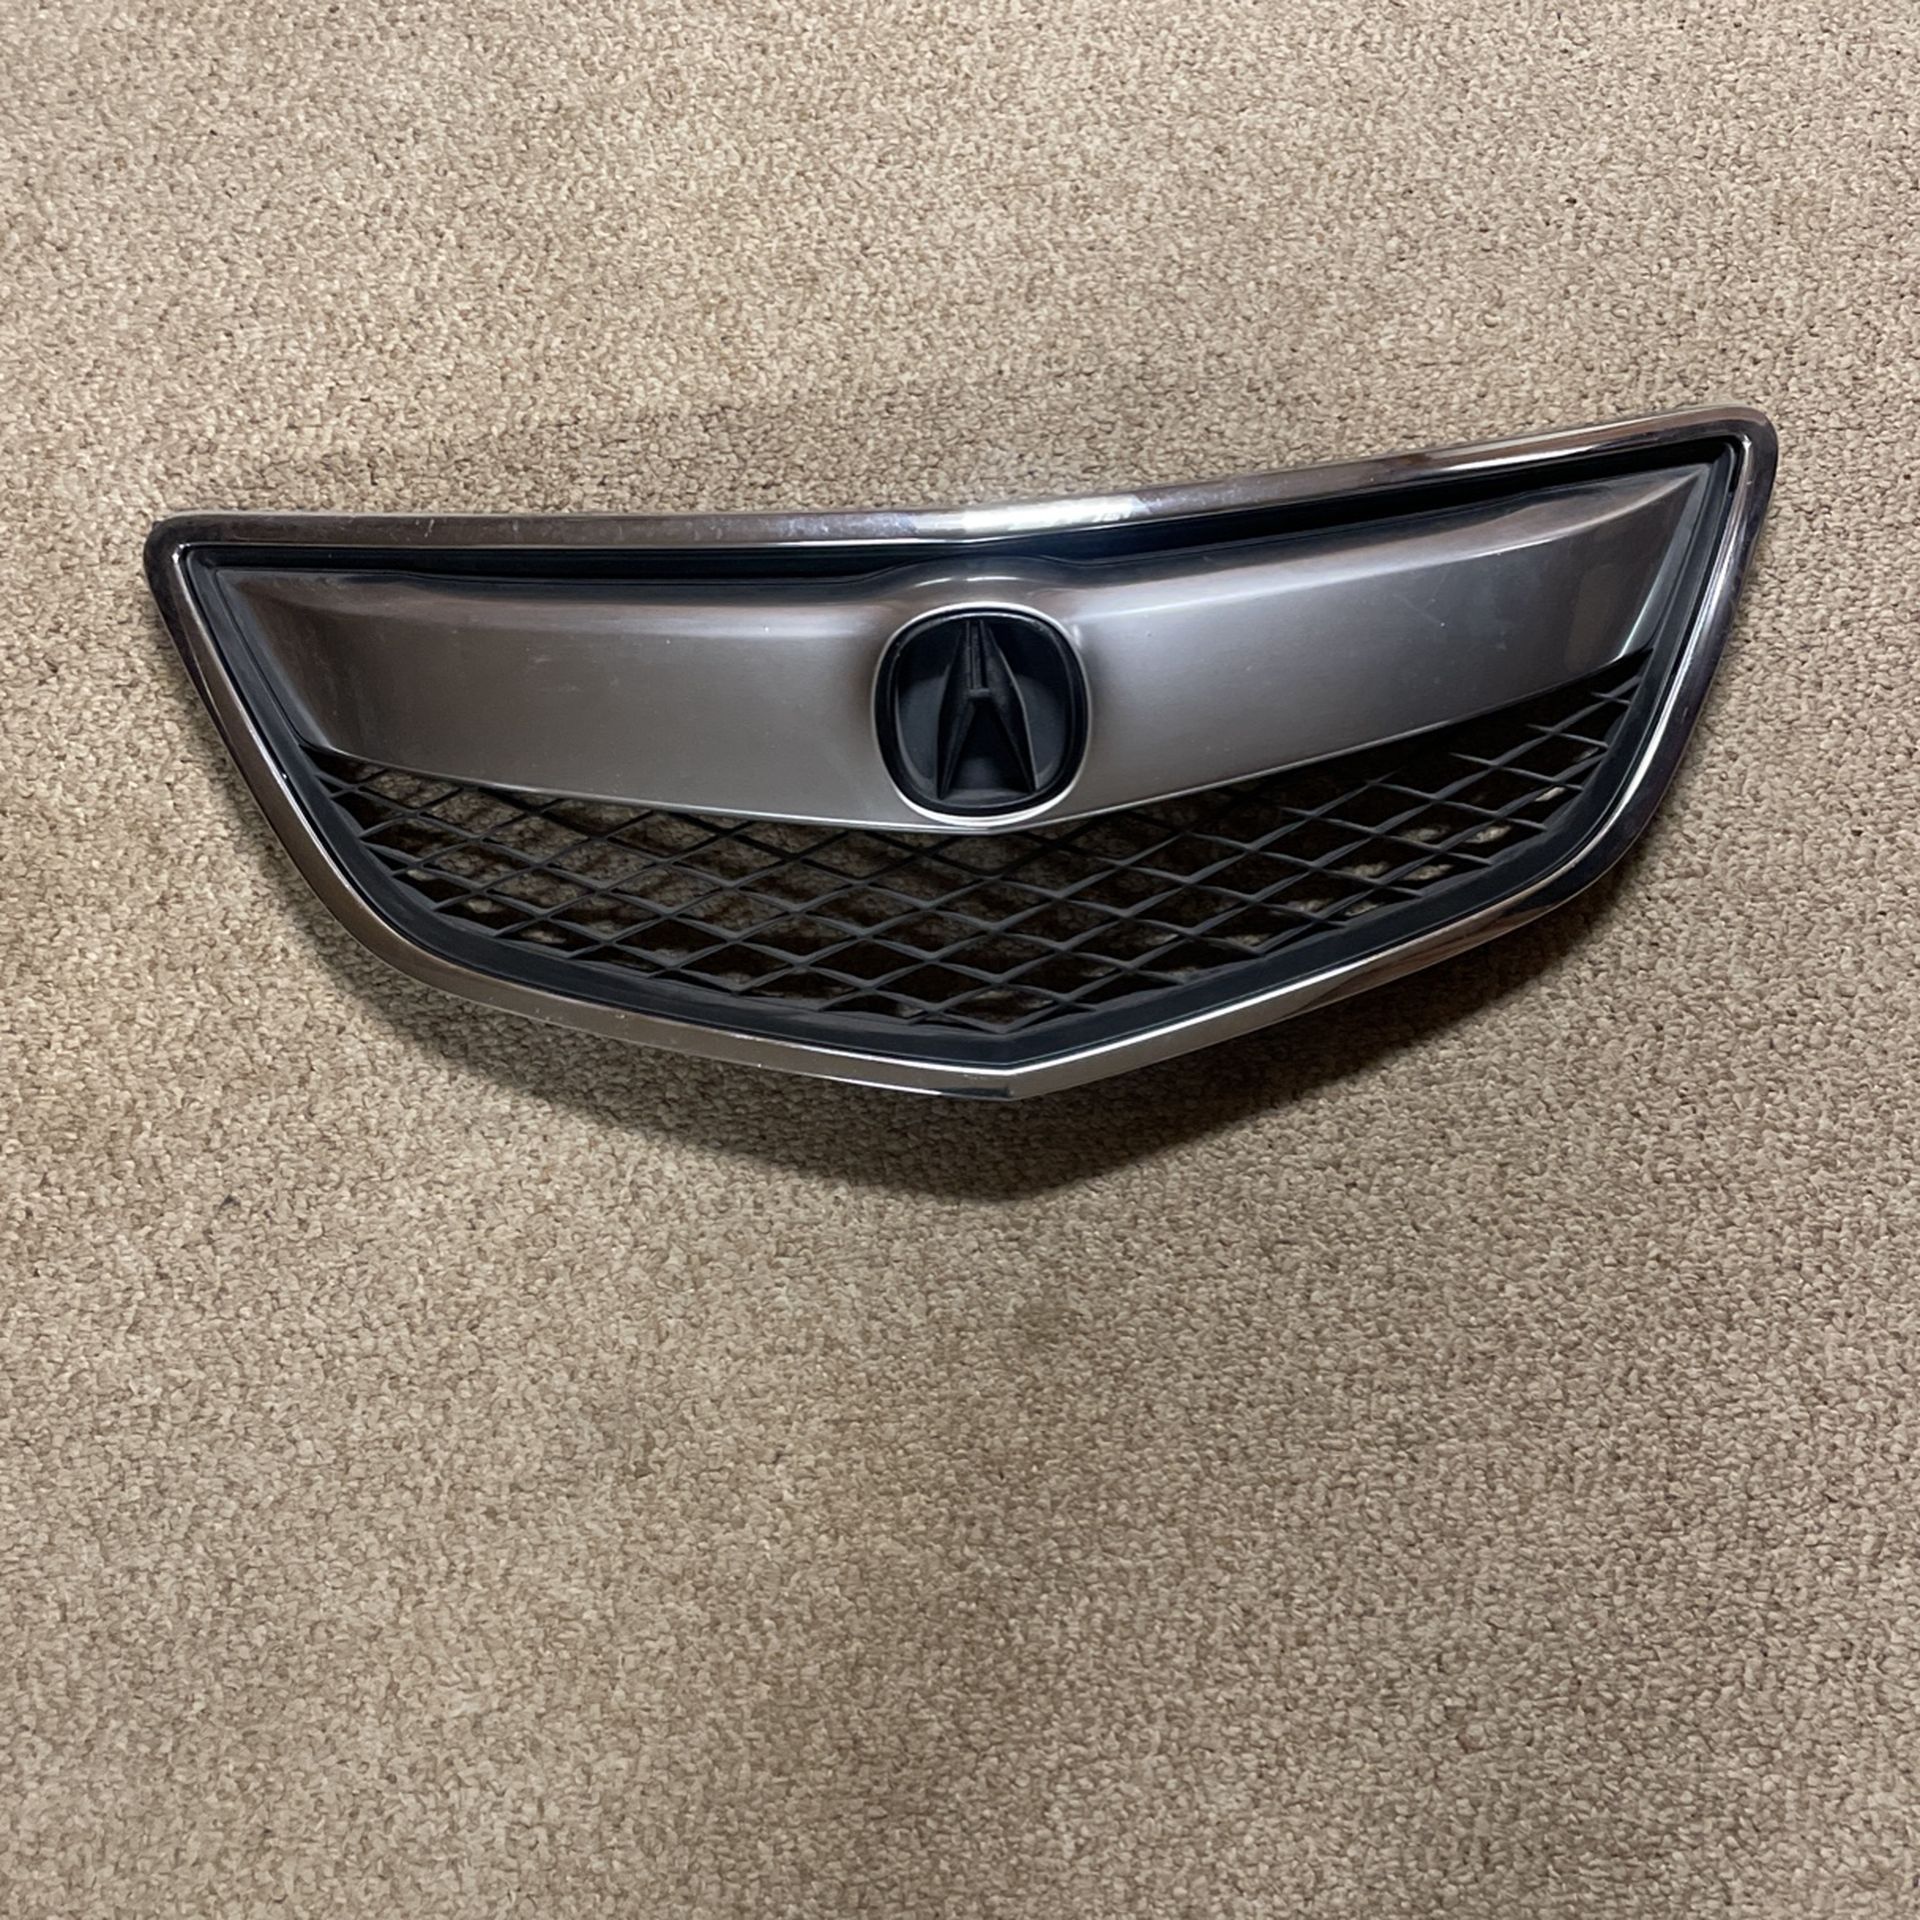 2013 2014 2015 Acura RDX Front Bumper Chrome Grille Mesh Grill